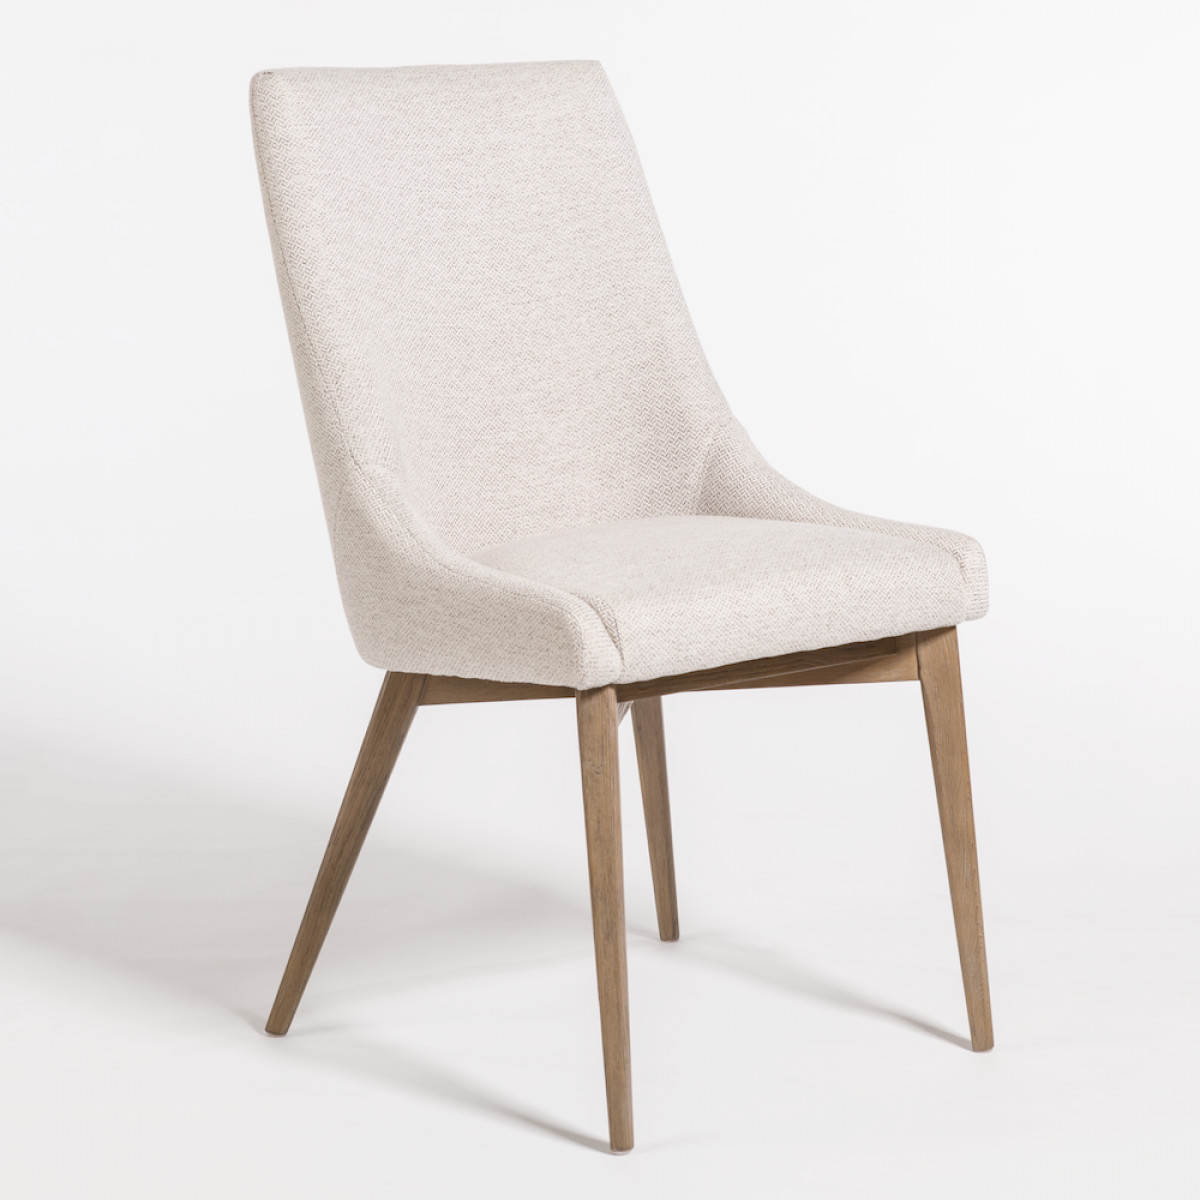 Shop Taylor Dining Chair In Light Sand And Natural Ash from DiMare Design on Openhaus